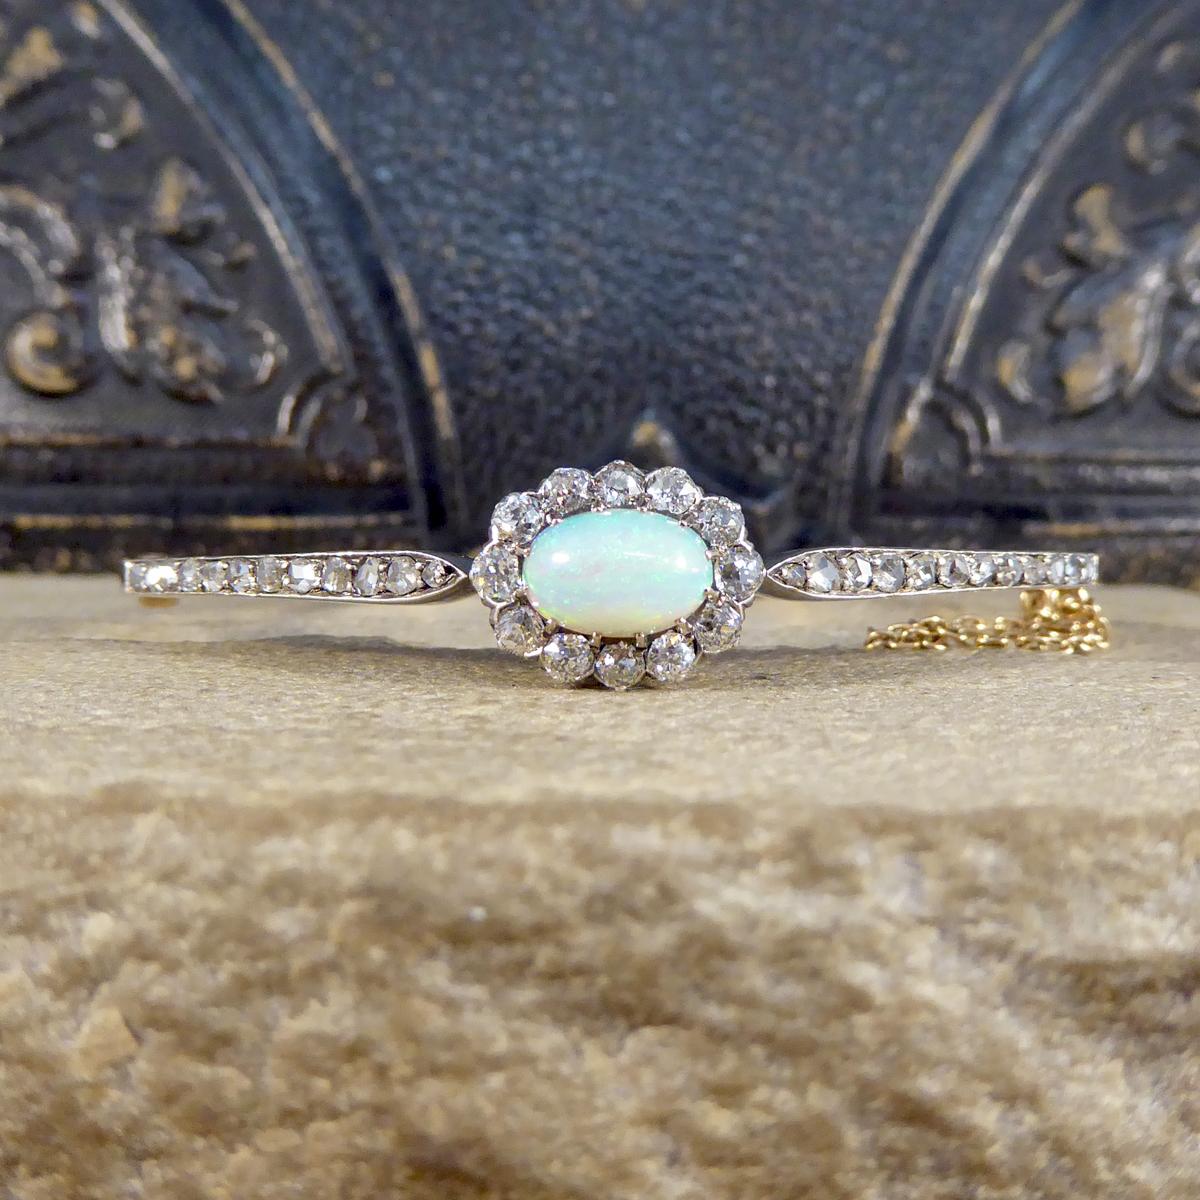 This beautiful antique bracelet was hand crafted in the Late Victorian era from 14ct Yellow gold with a Silver top for the settings. This gorgeous example of a Late Victorian Bangle features an Lustrous Opal with a surround of Old Cut Diamonds